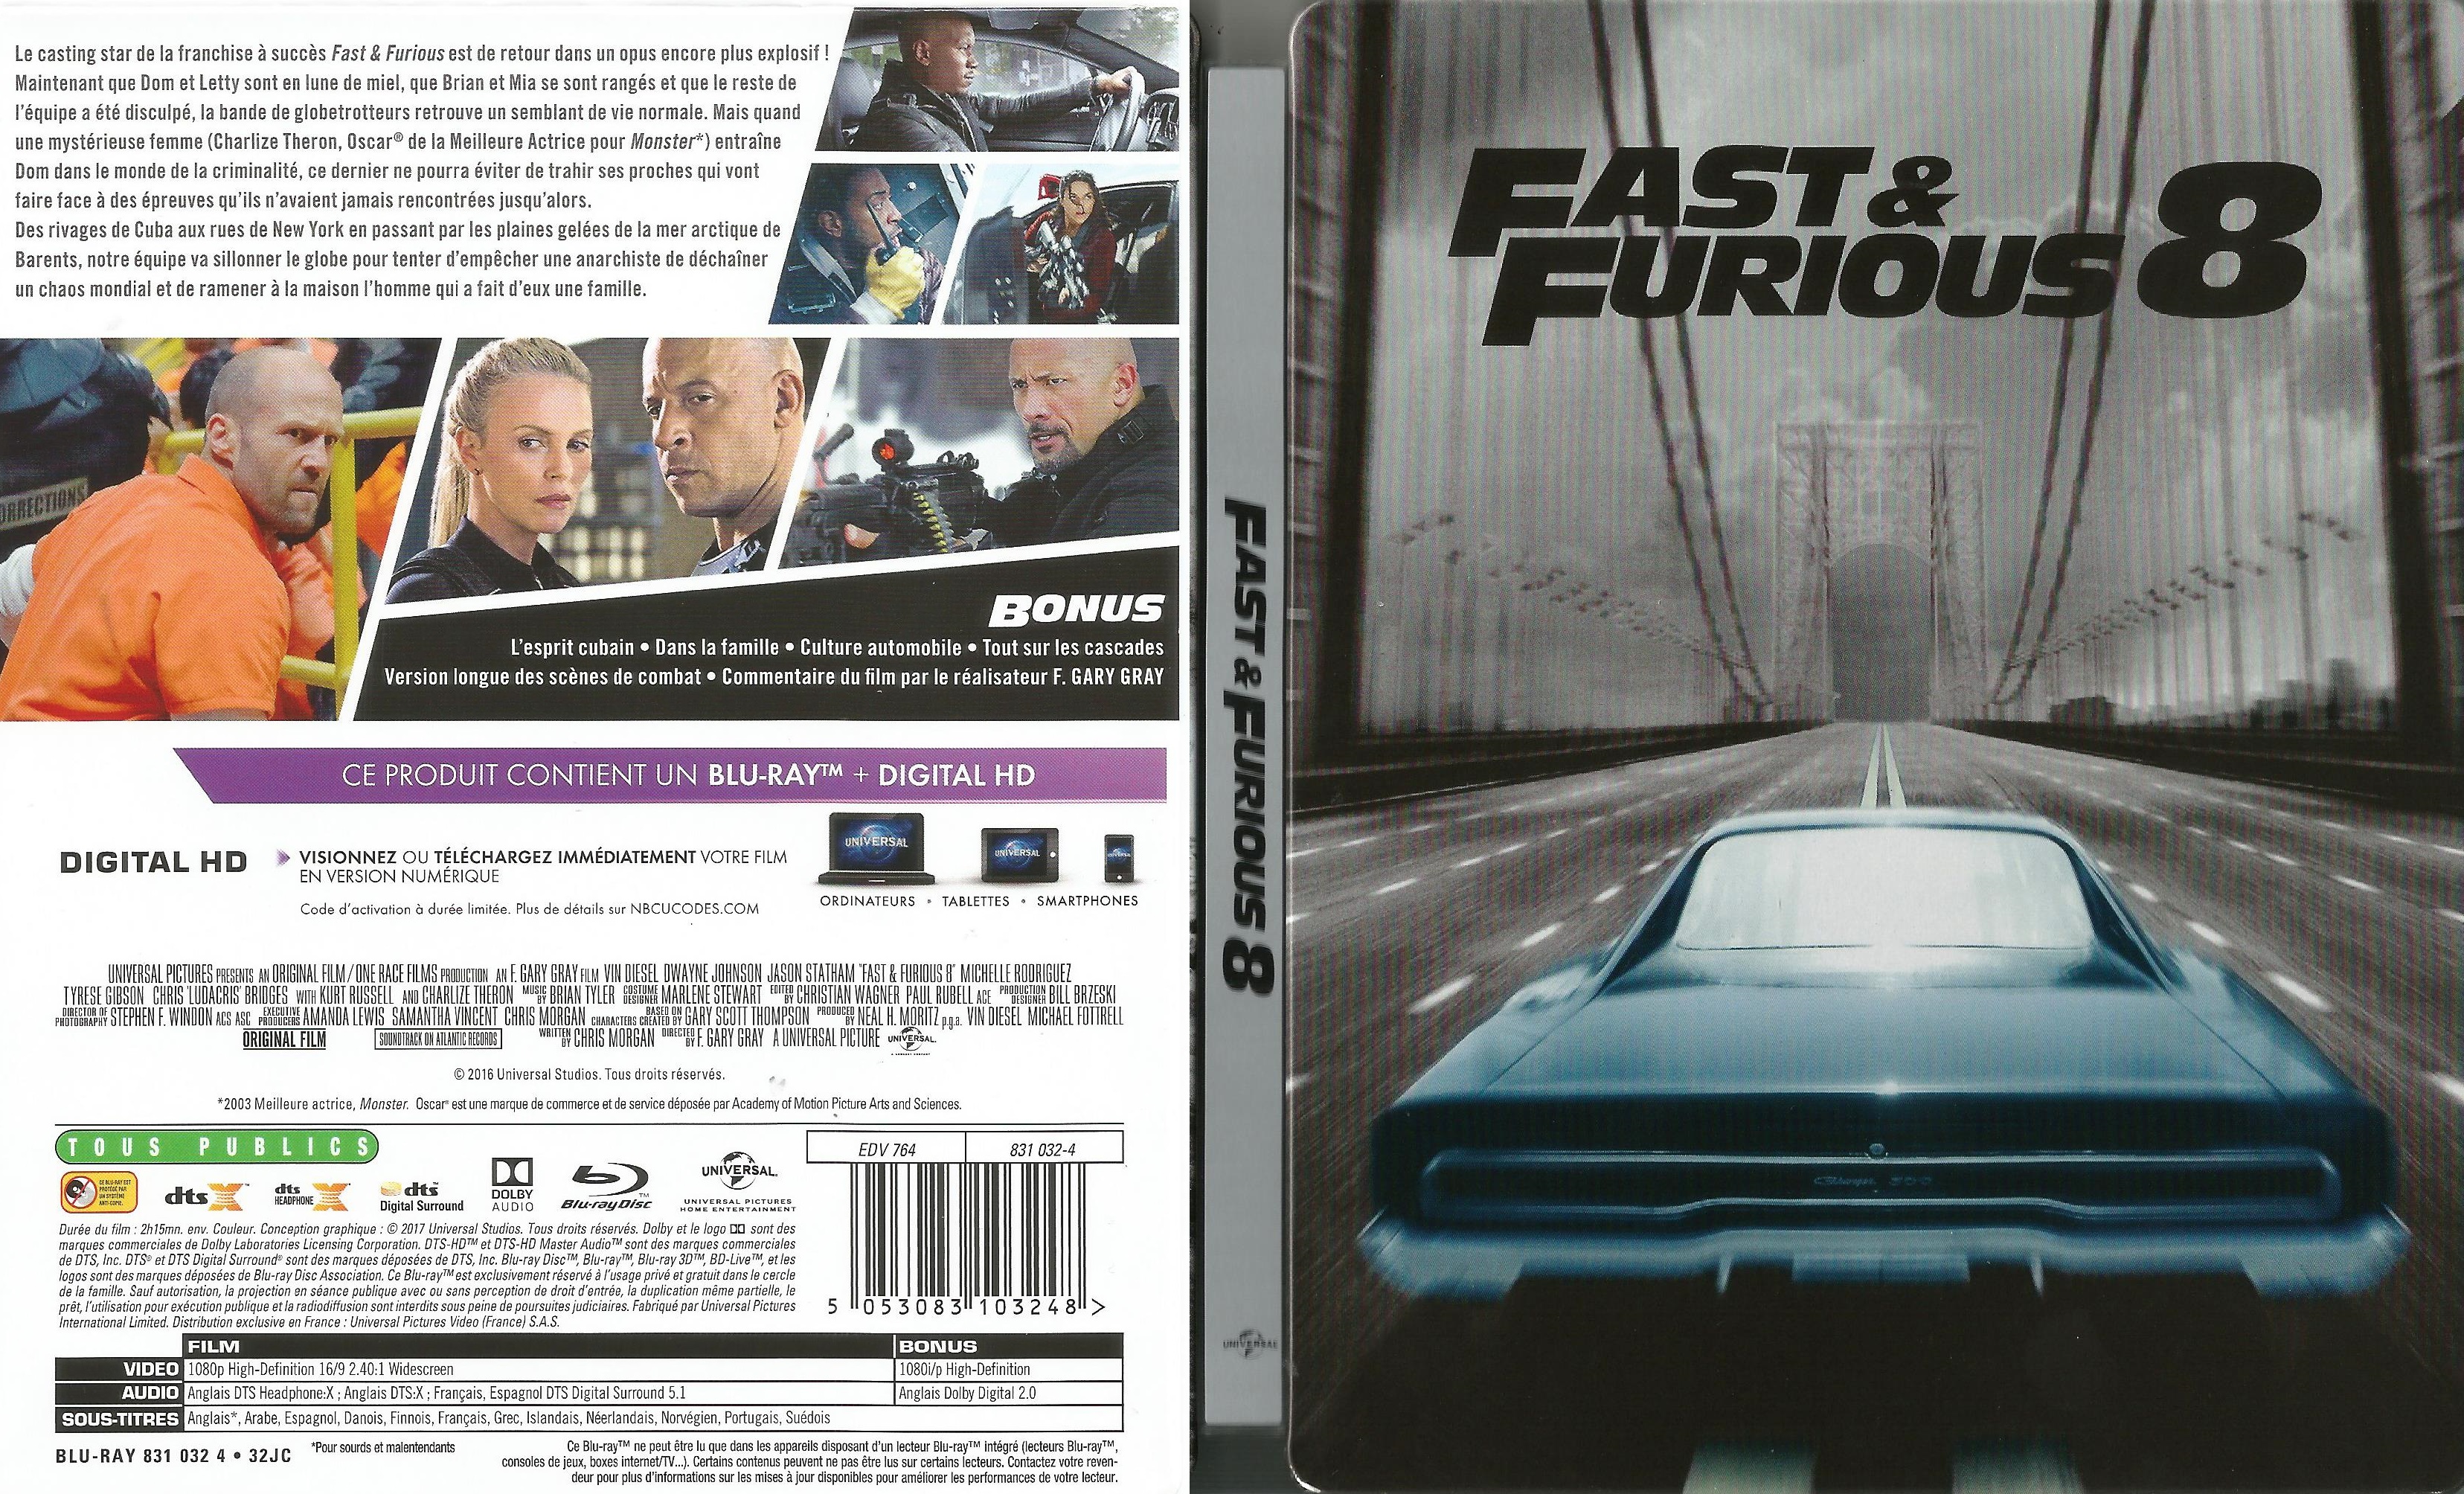 Jaquette DVD Fast And Furious 8 (BLU-RAY) v2